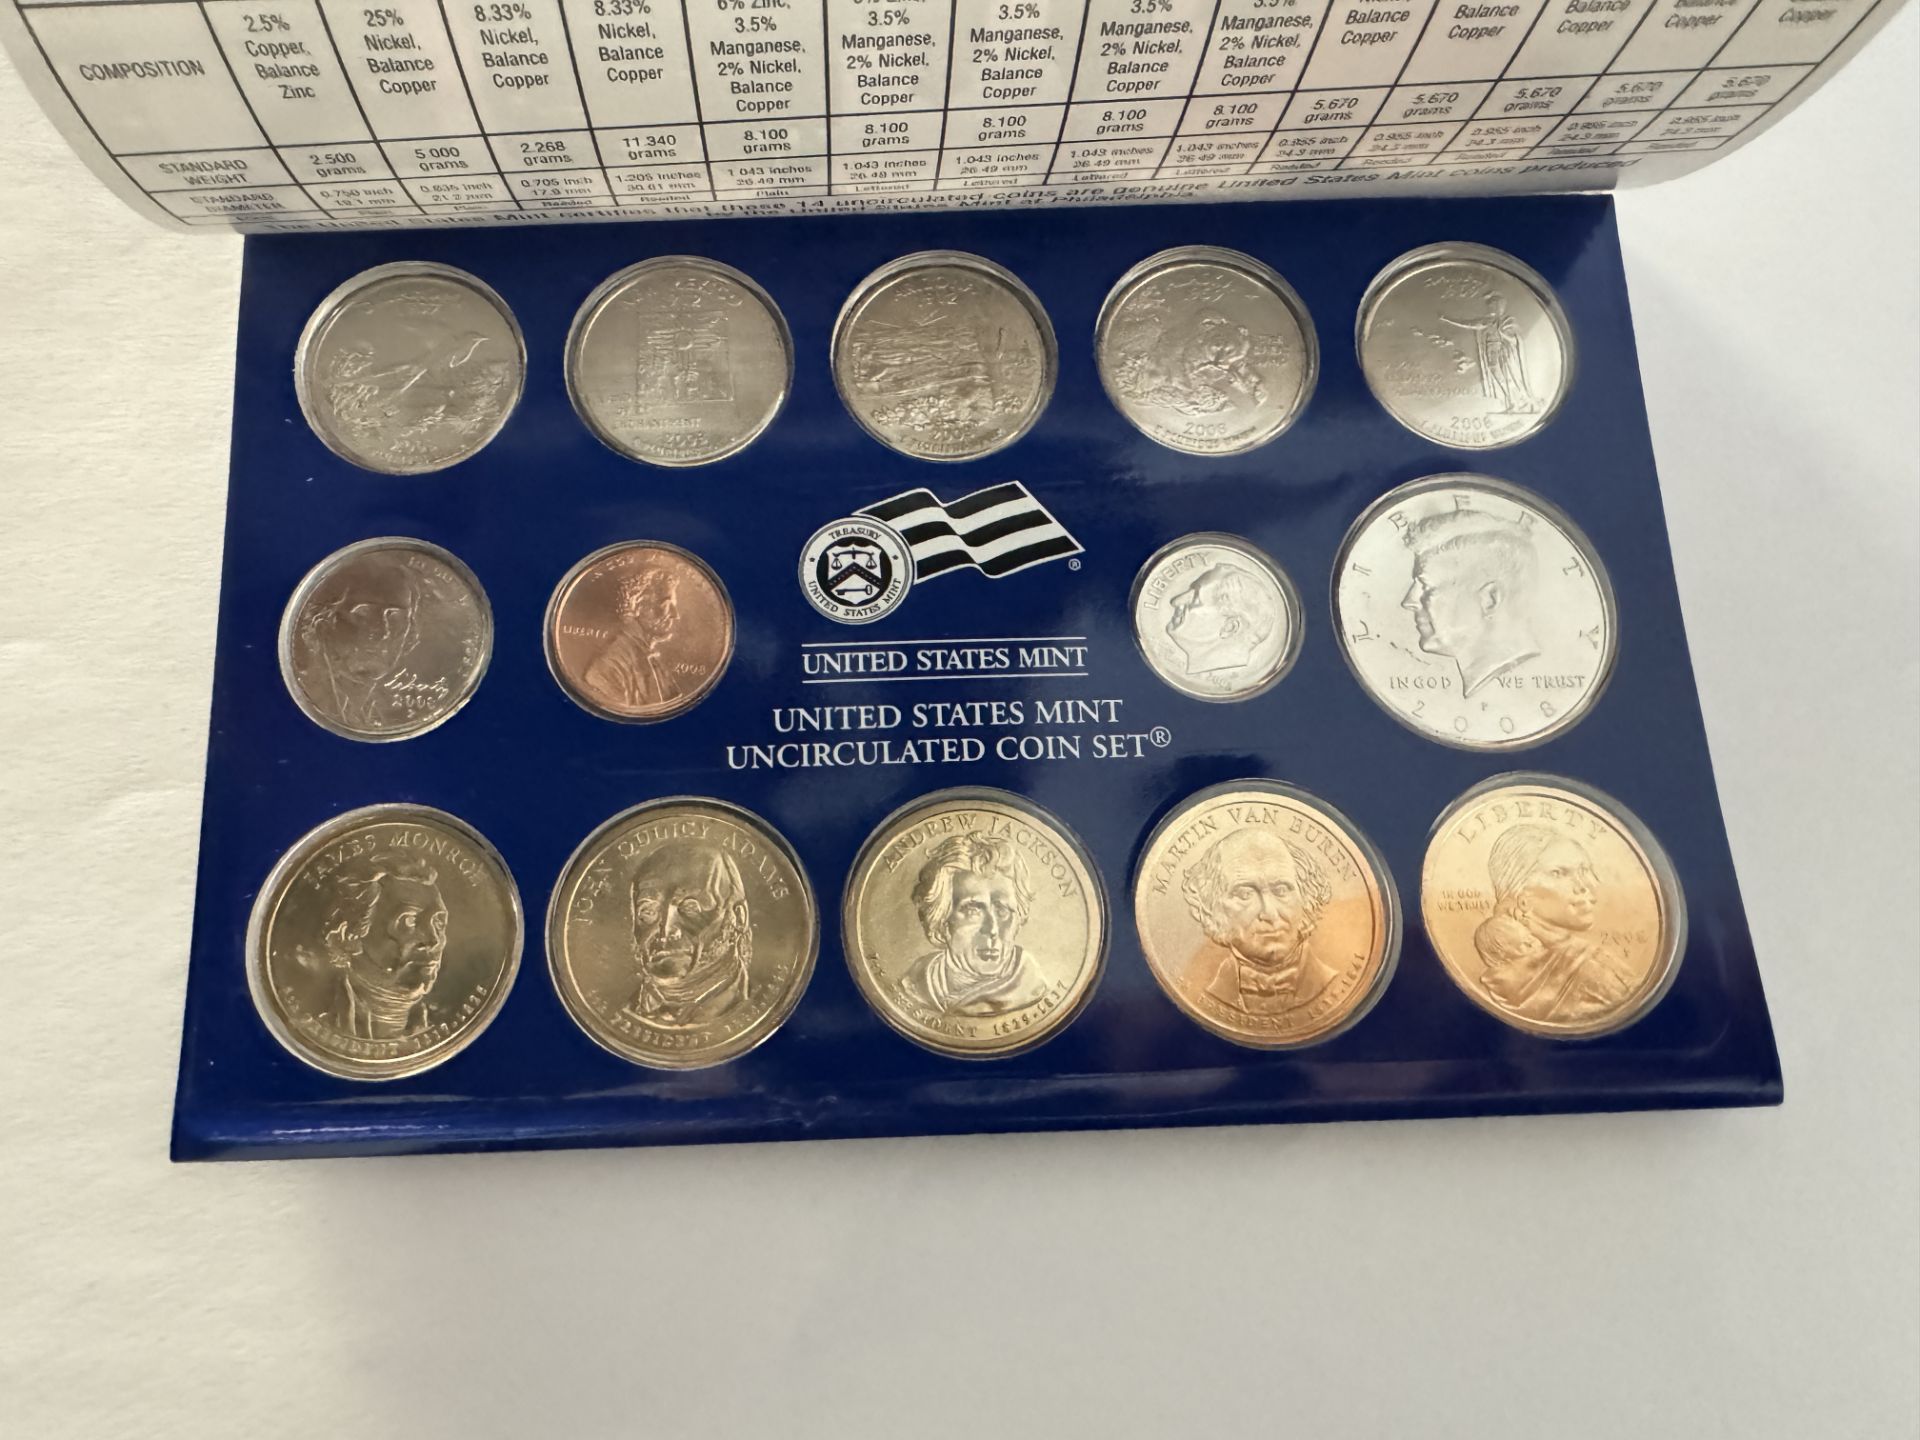 2008 Philadelphia United States Mint Uncirculated Coin Set® - Image 2 of 2